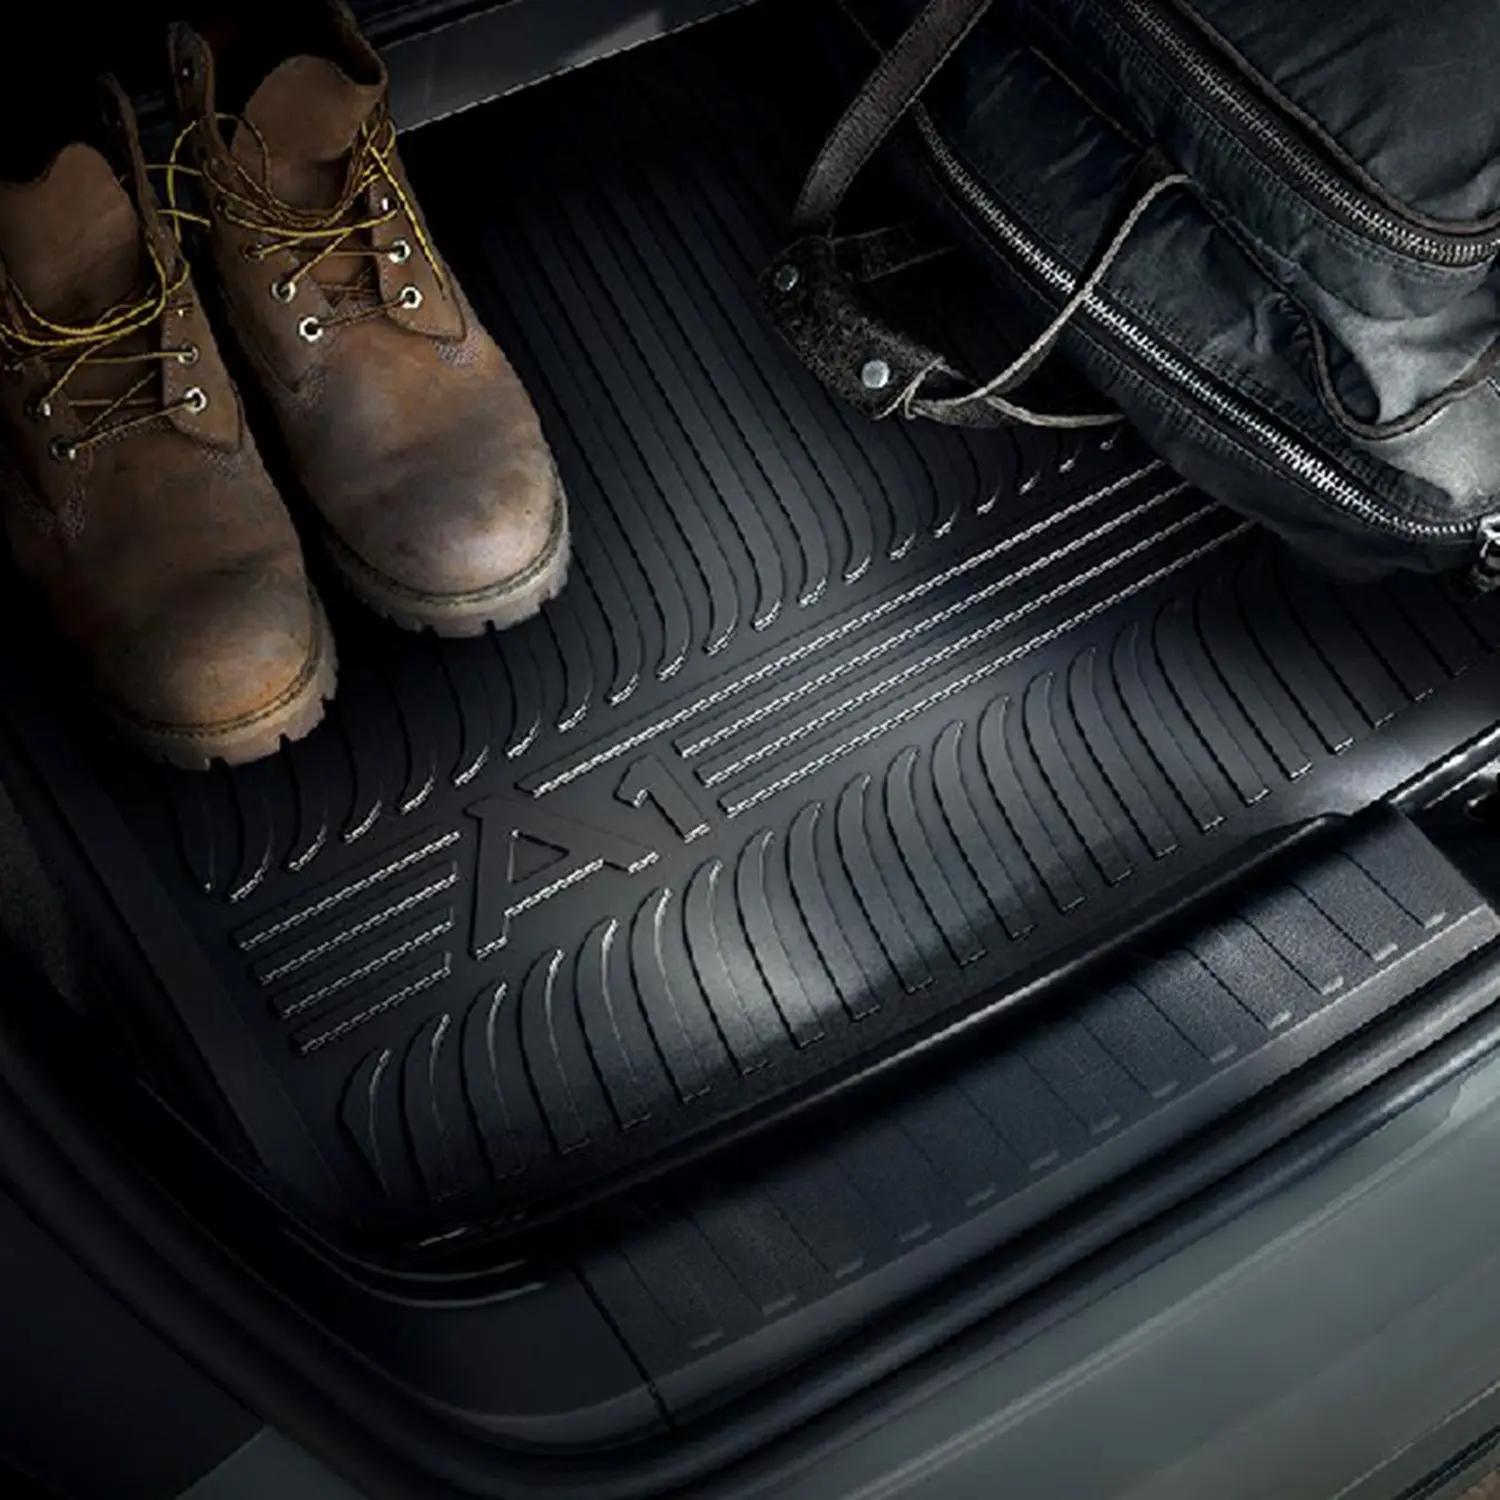 Audi Genuine Boot Liner with boots and bag on top (this specific boot liner is for the Audi A1)